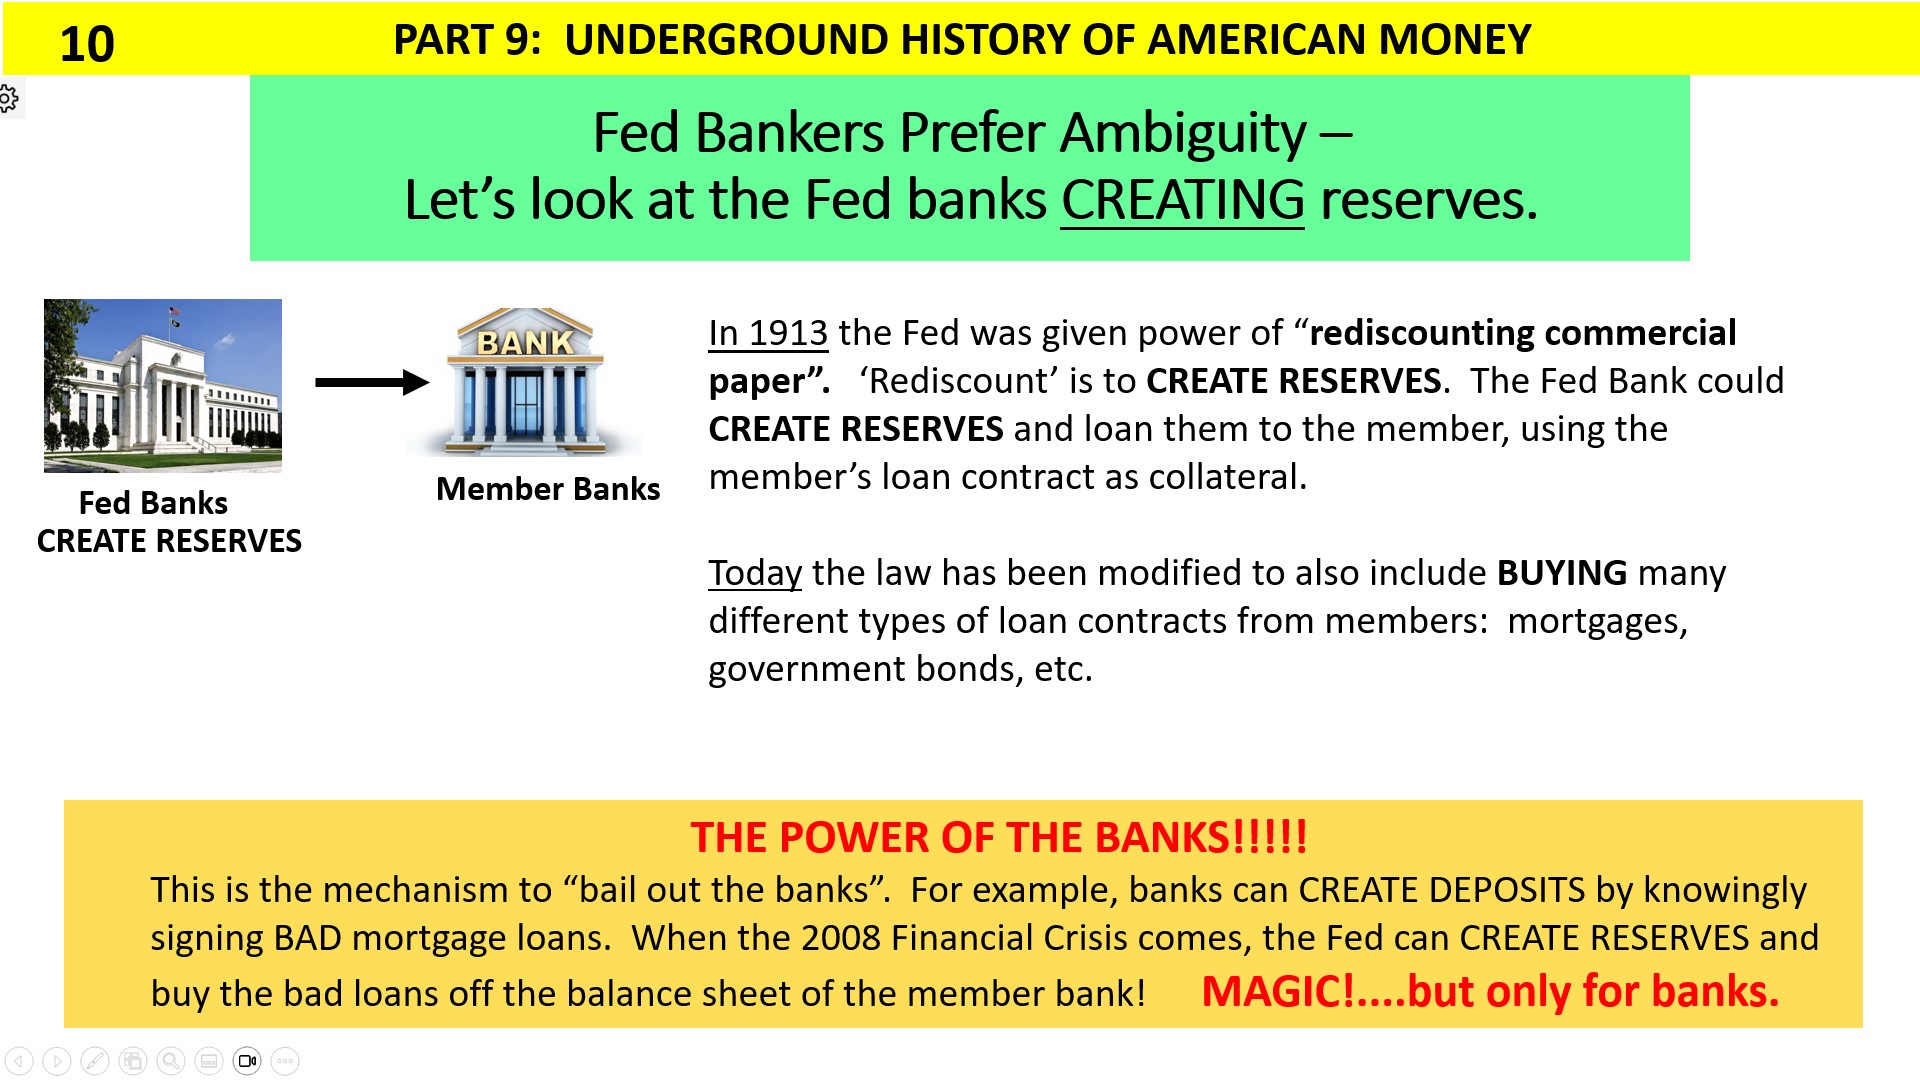 Federal Reserve buys bad loans from banks to provide reserves and bail out banks.